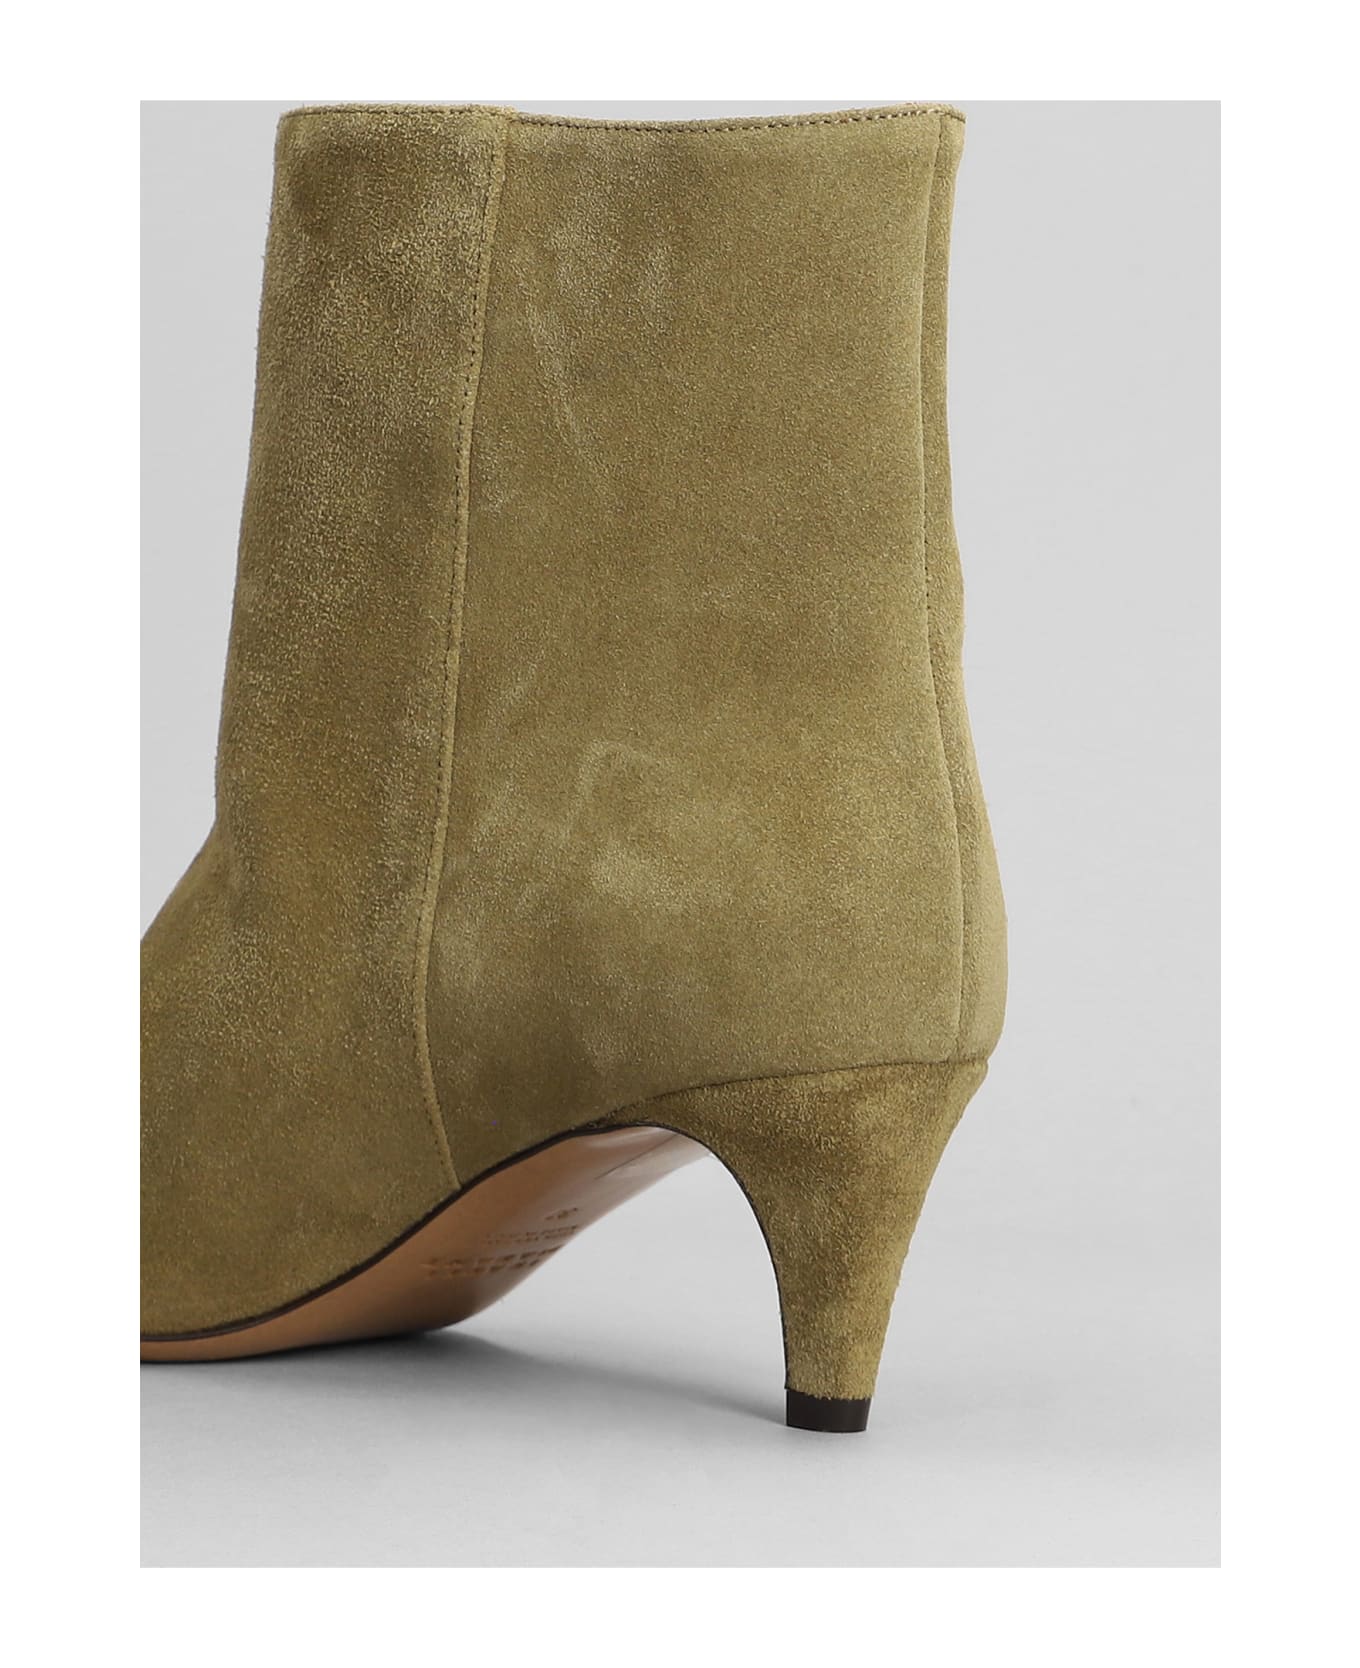 Isabel Marant Daxi Low Heels Ankle Boots In Taupe Suede - taupe